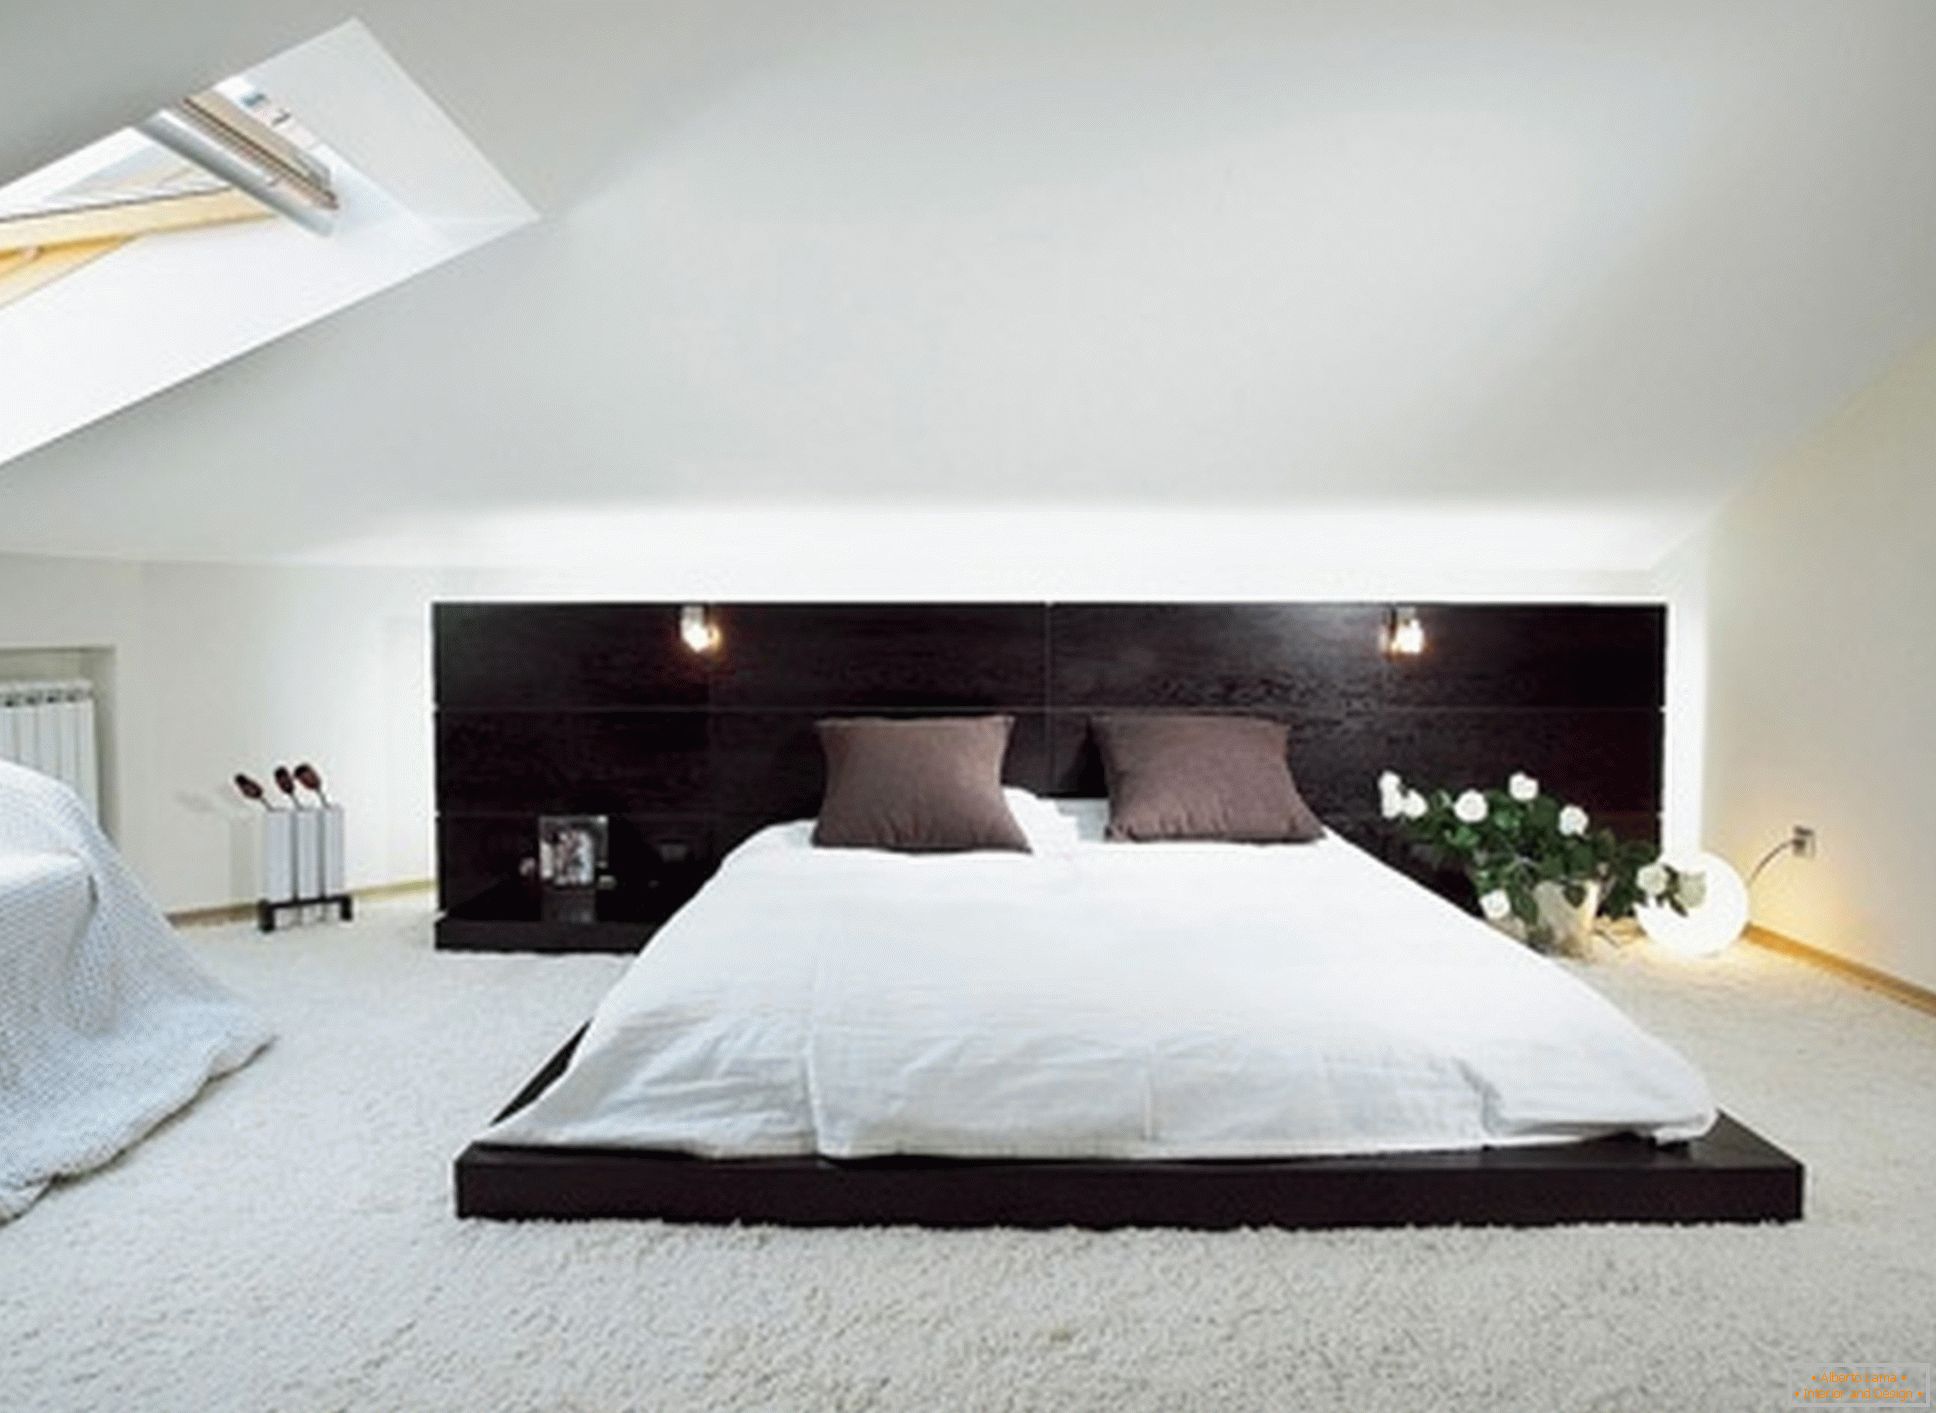 Luxurious bedroom in the style of minimalism - an example of a successful design of a small room on the attic floor.